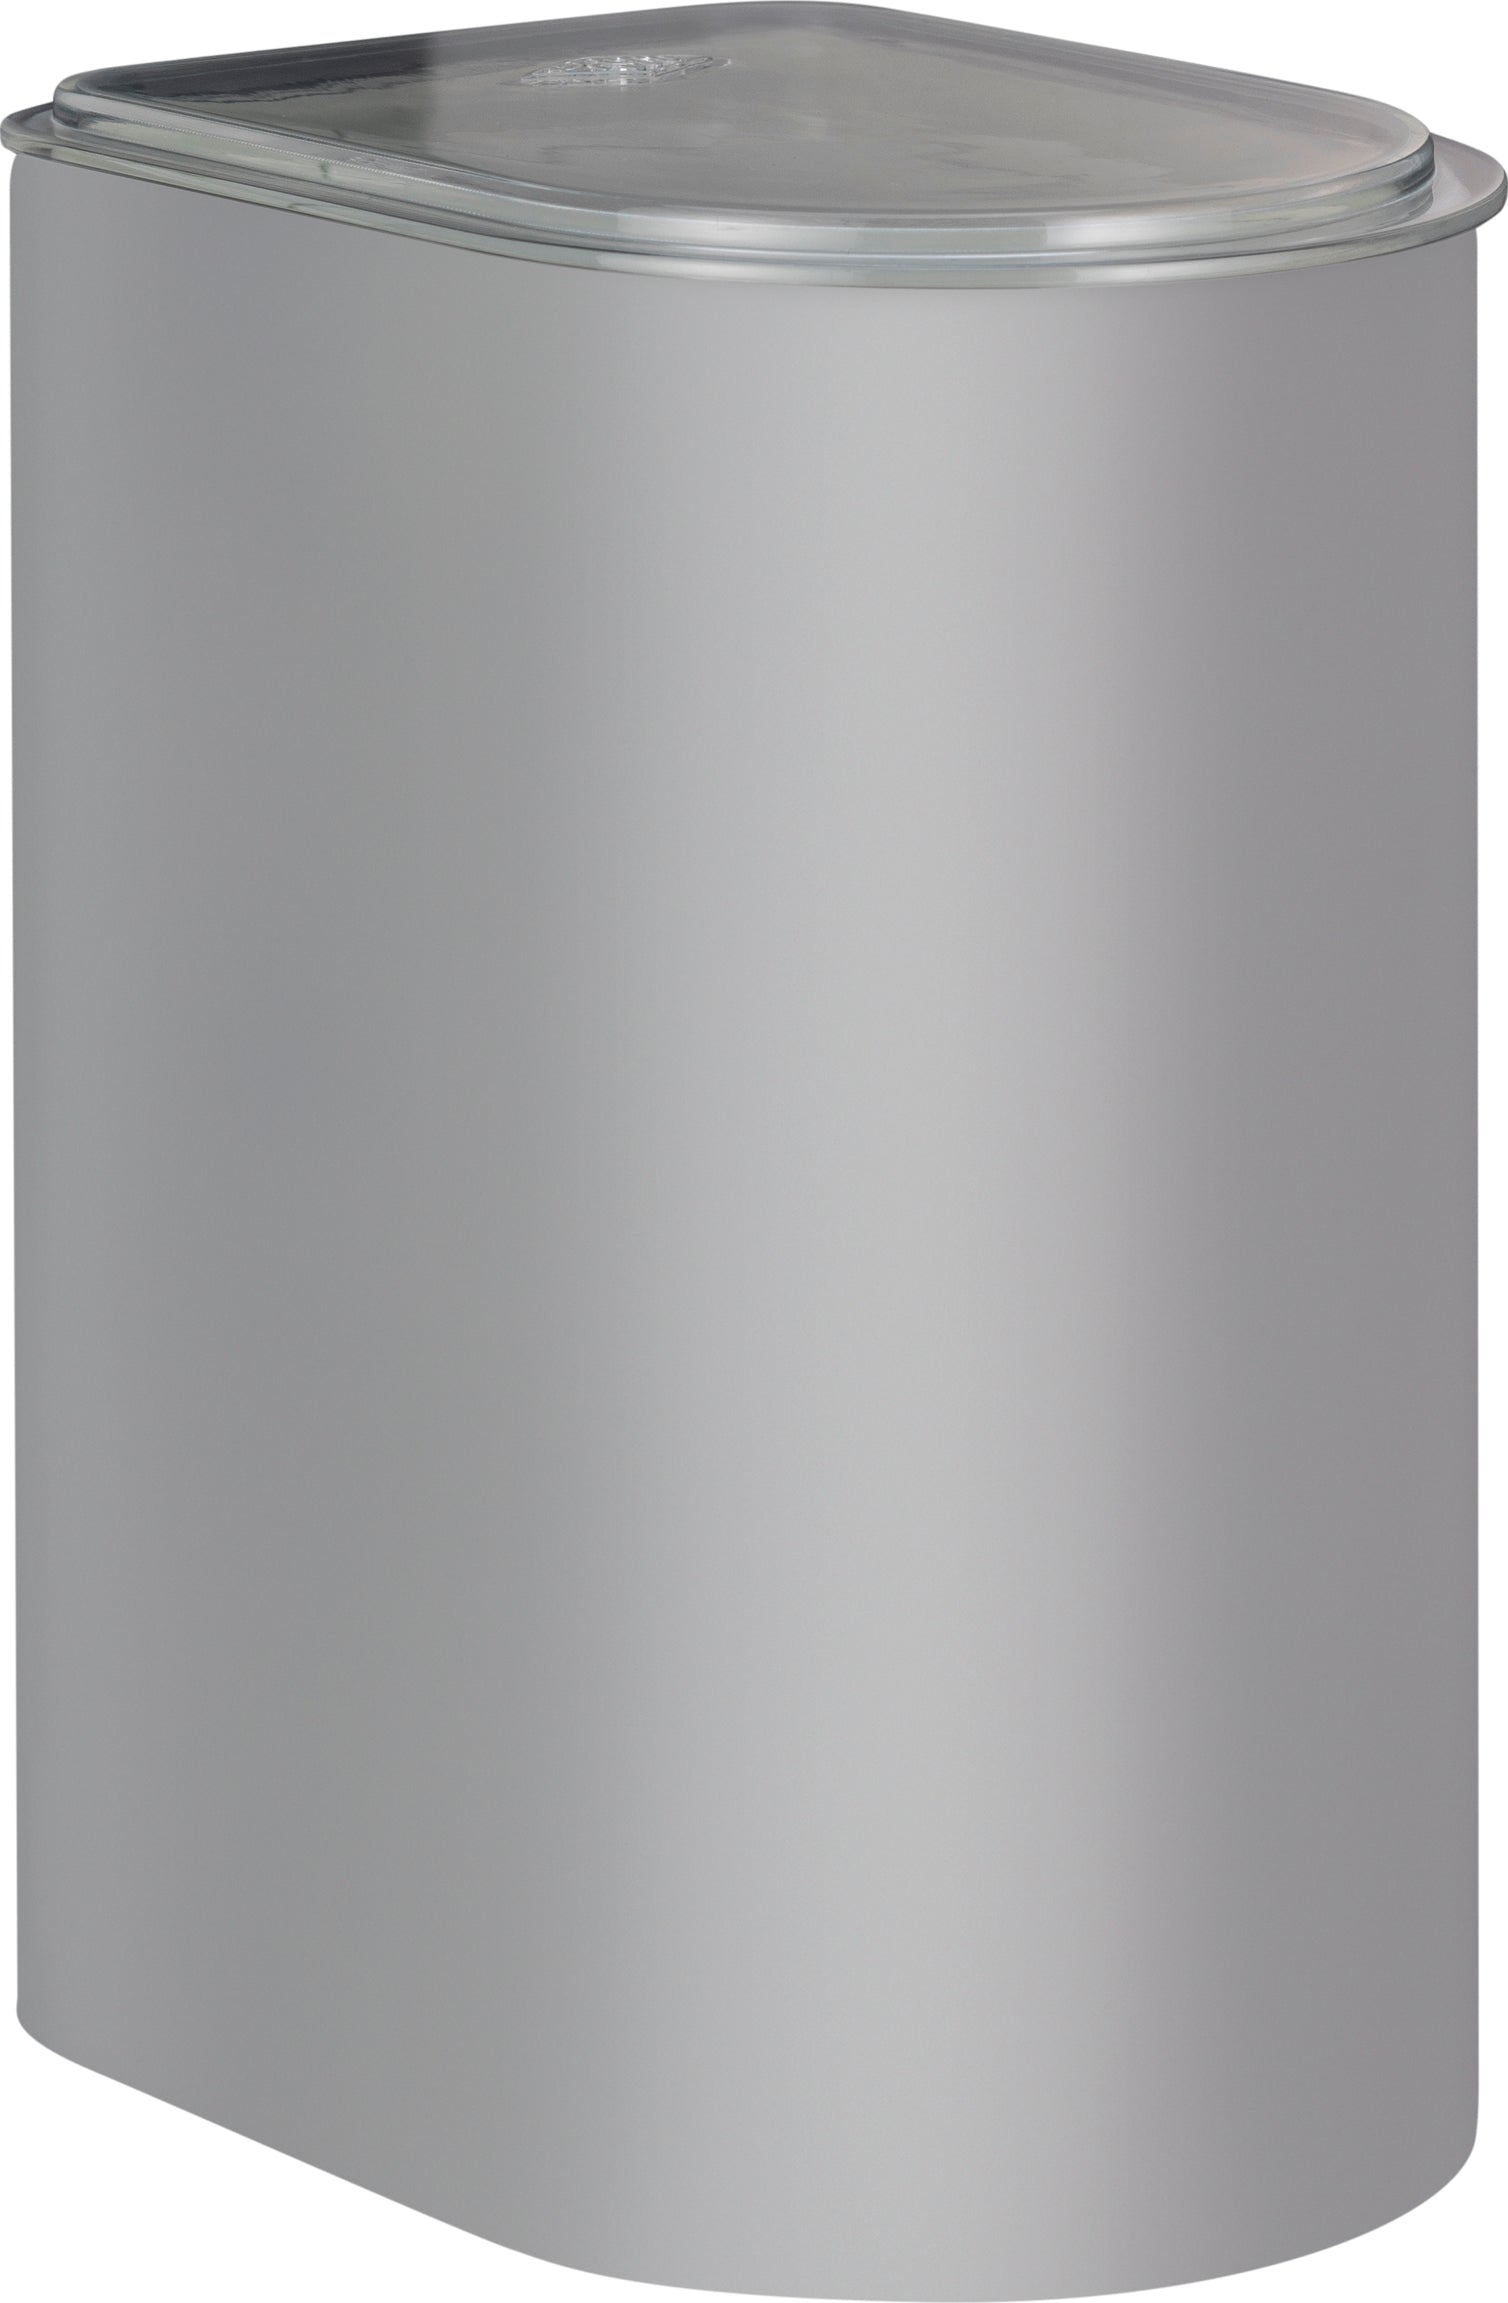 Wesco Canister 3 Litre With Acrylic Lid, Cool Grey Matt